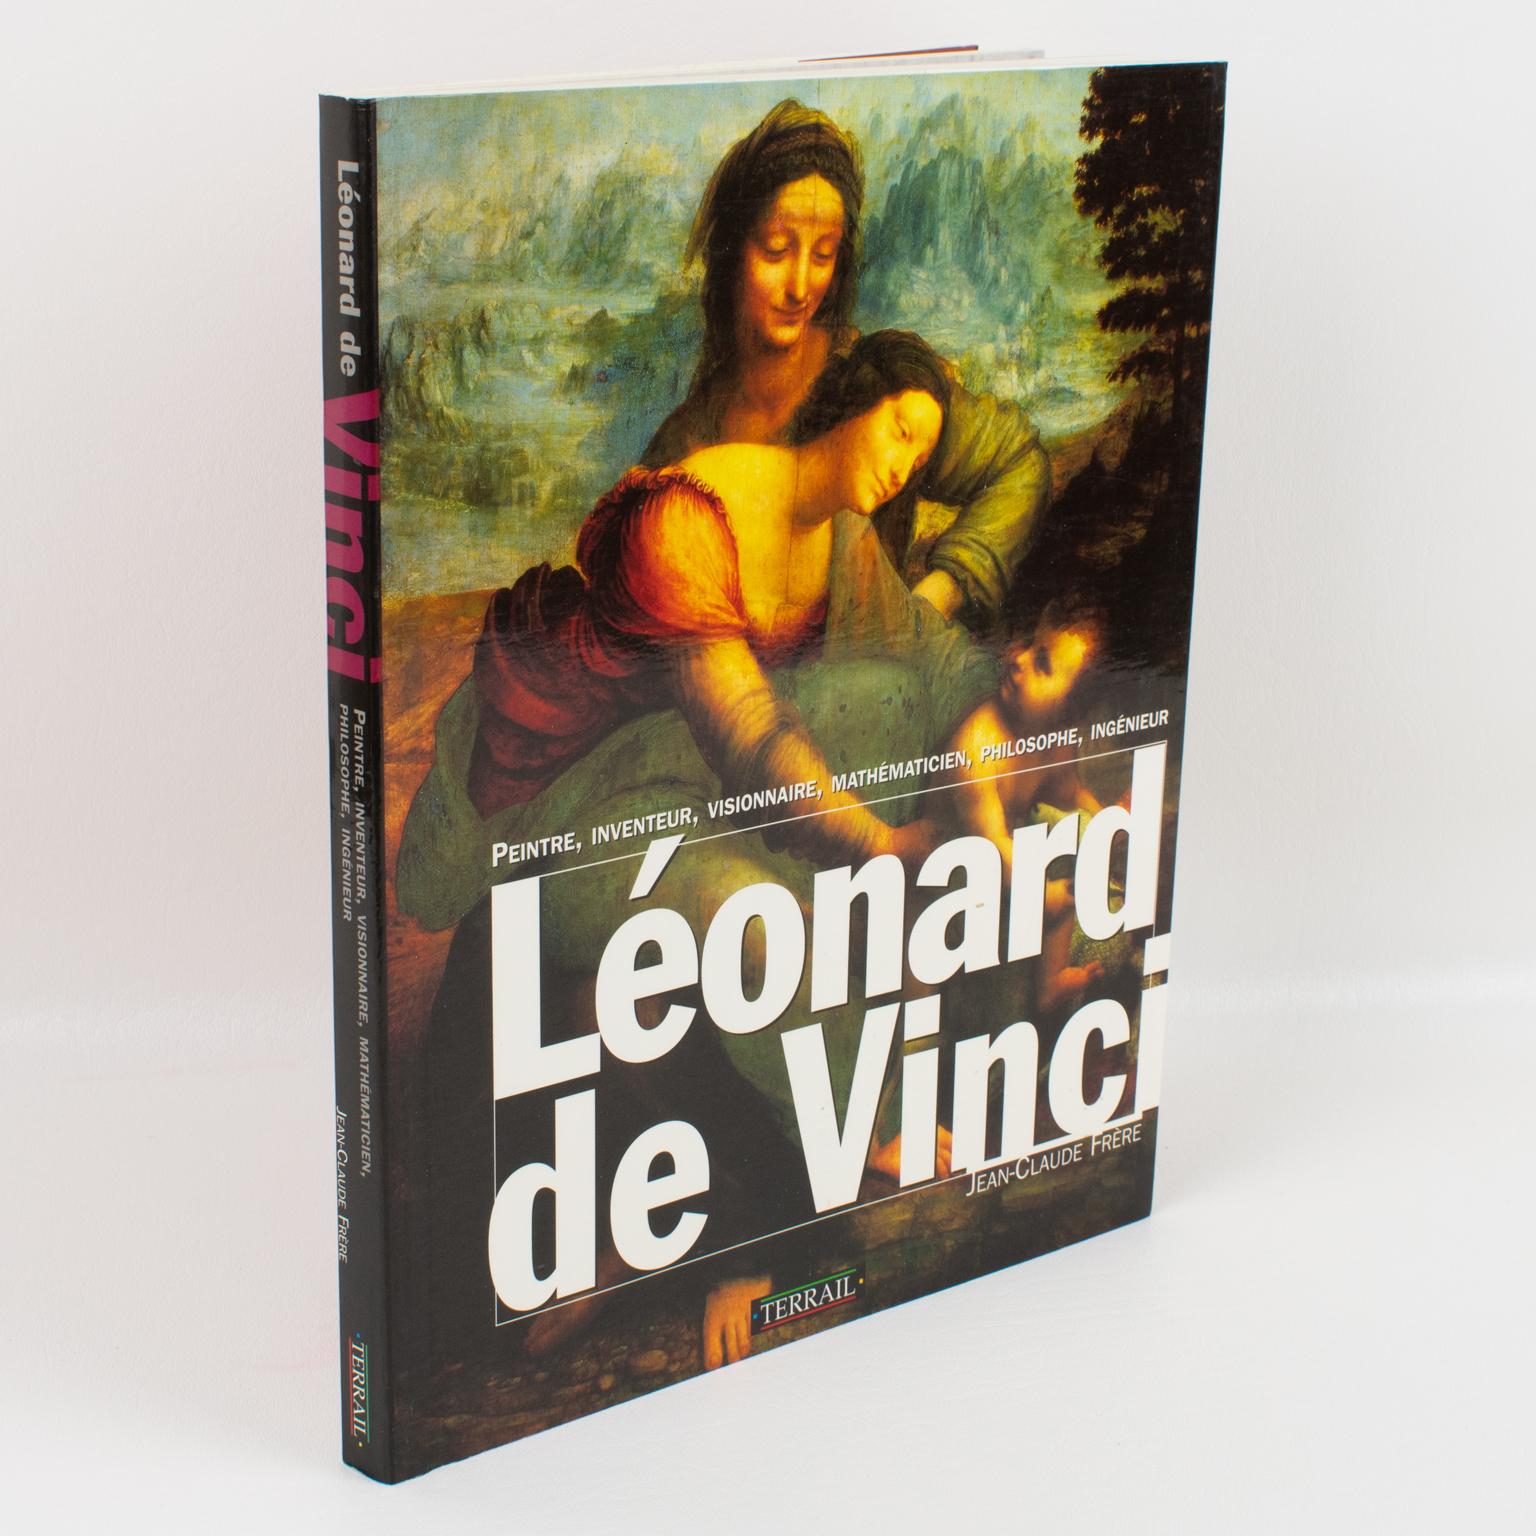 Leonard de Vinci (Leonardo Da Vinci), French book by Jean-Claude, Frere, 1994.
We generally agree to recognize Leonardo da Vinci as the all-time greatest artist. This book retraces his career as a painter. This work was born of the need to